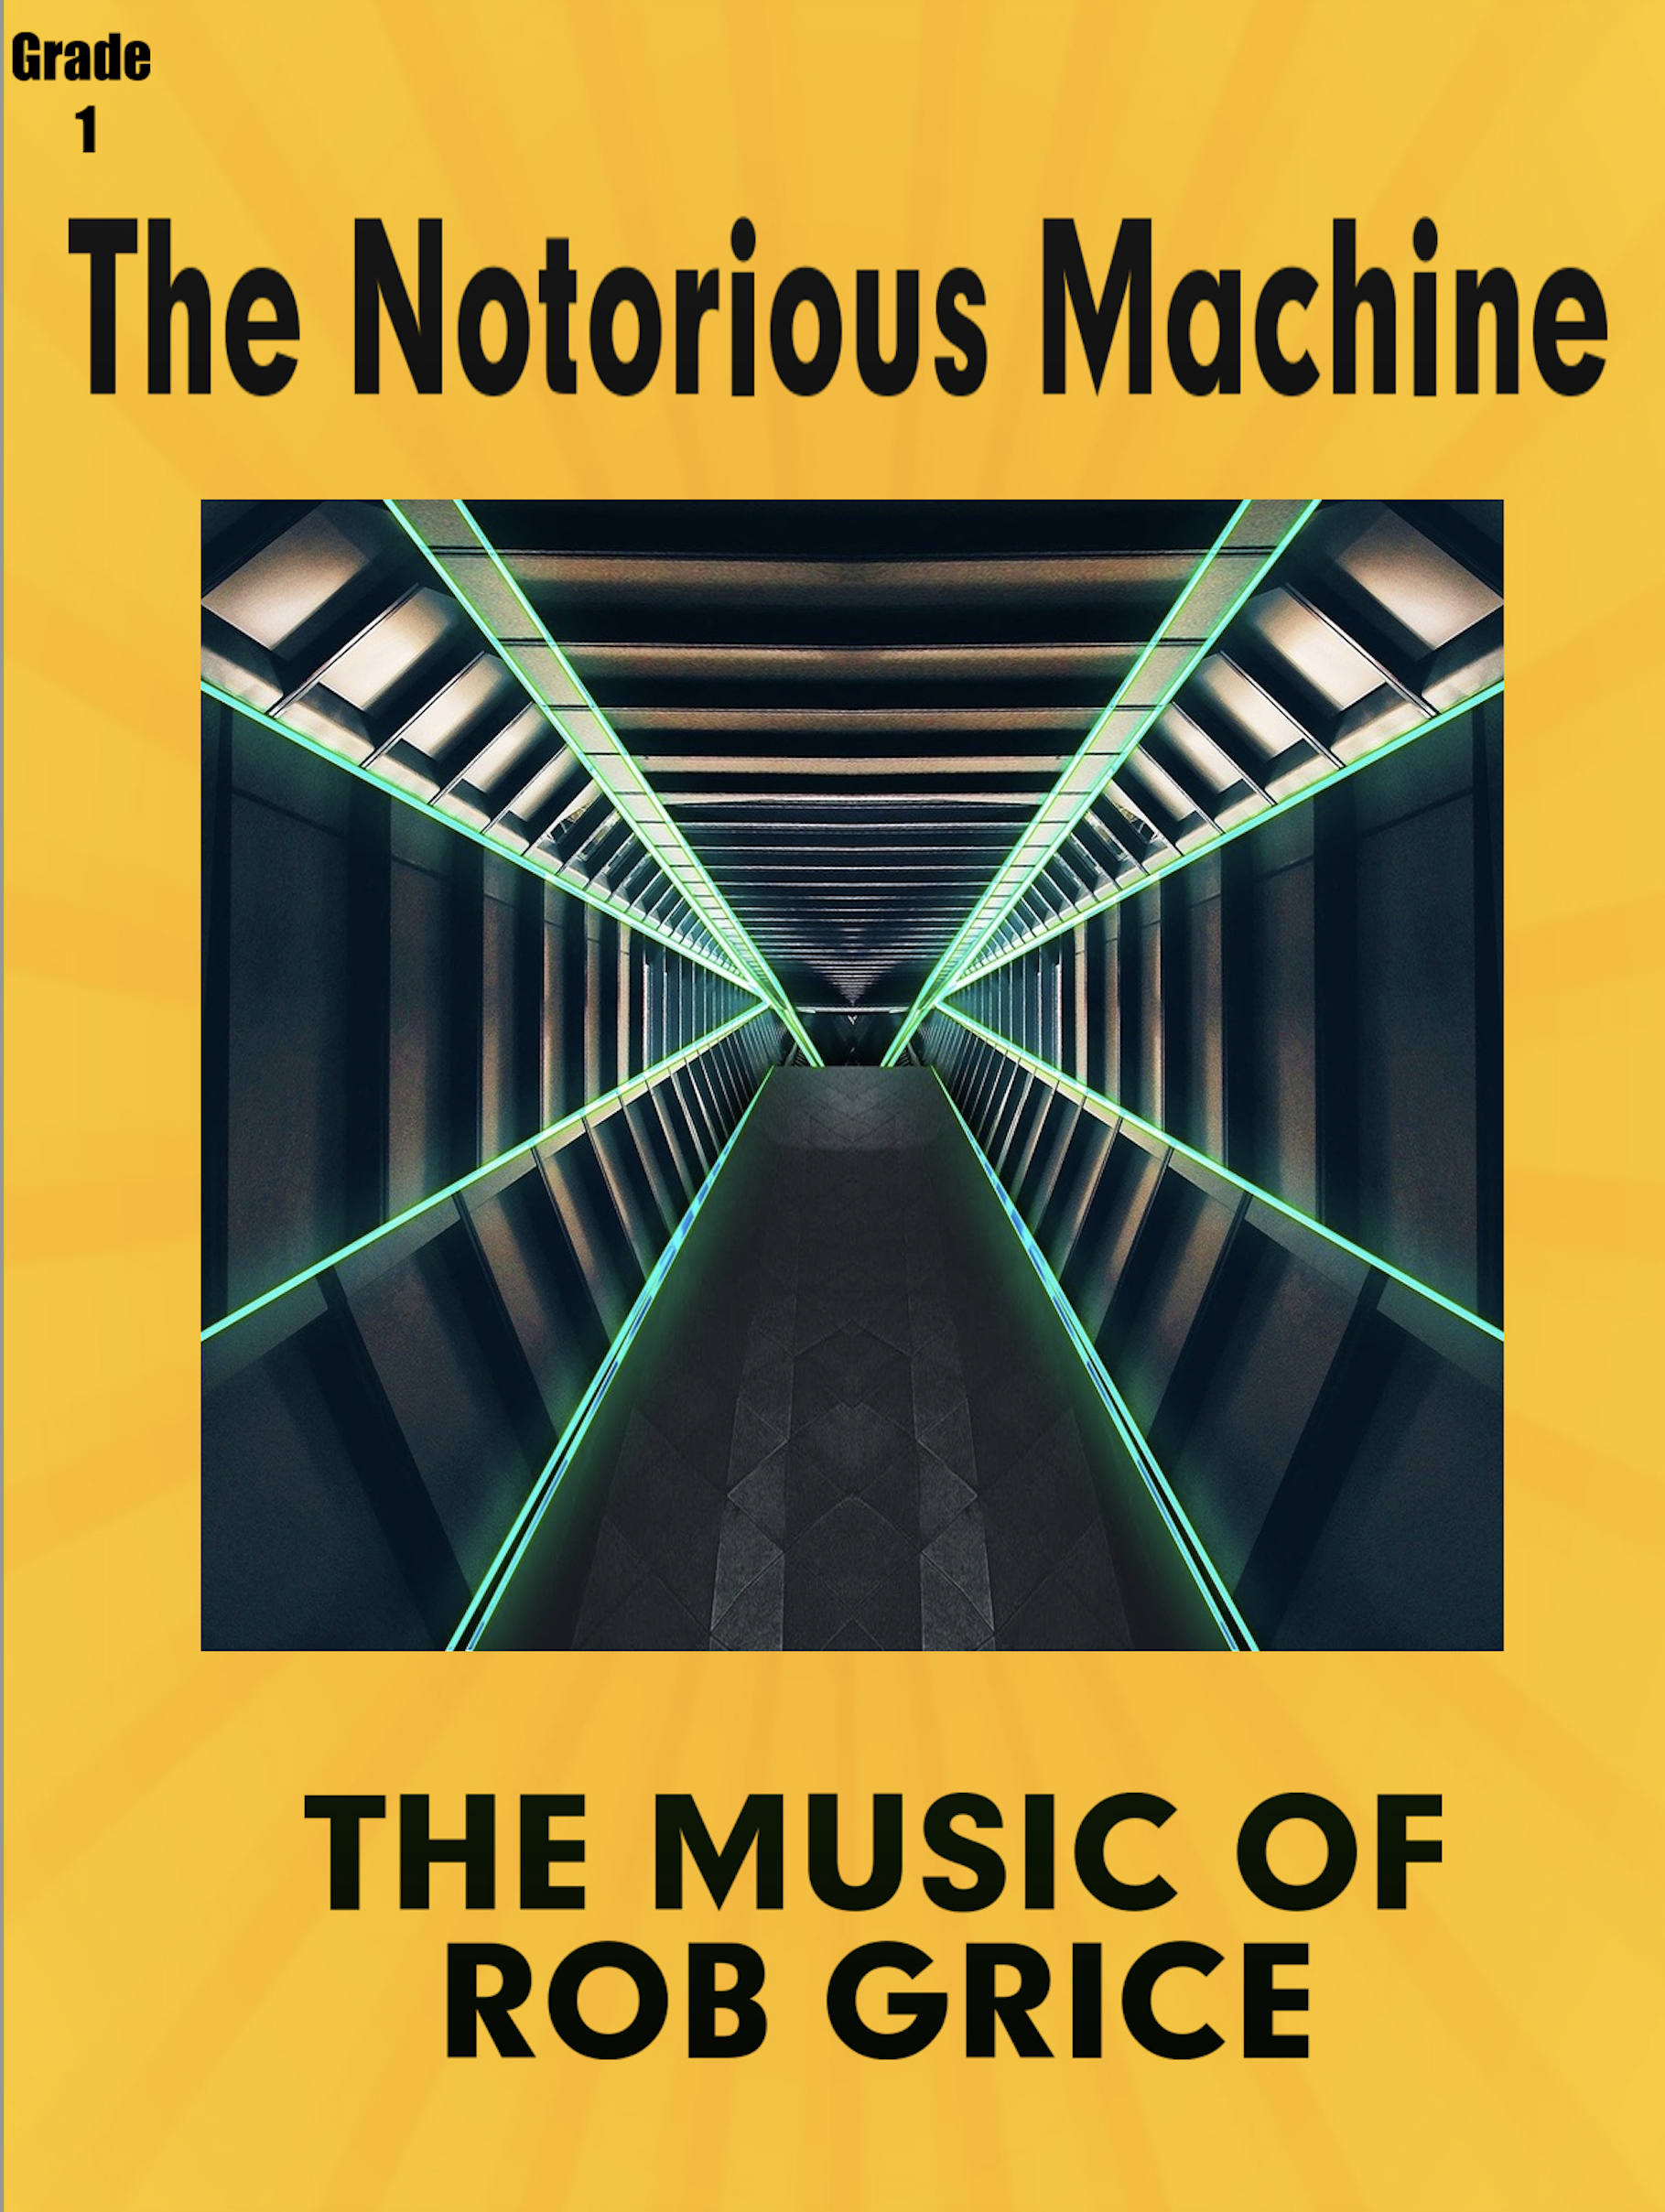 The Notorious Machine (Score Only) by Rob Grice